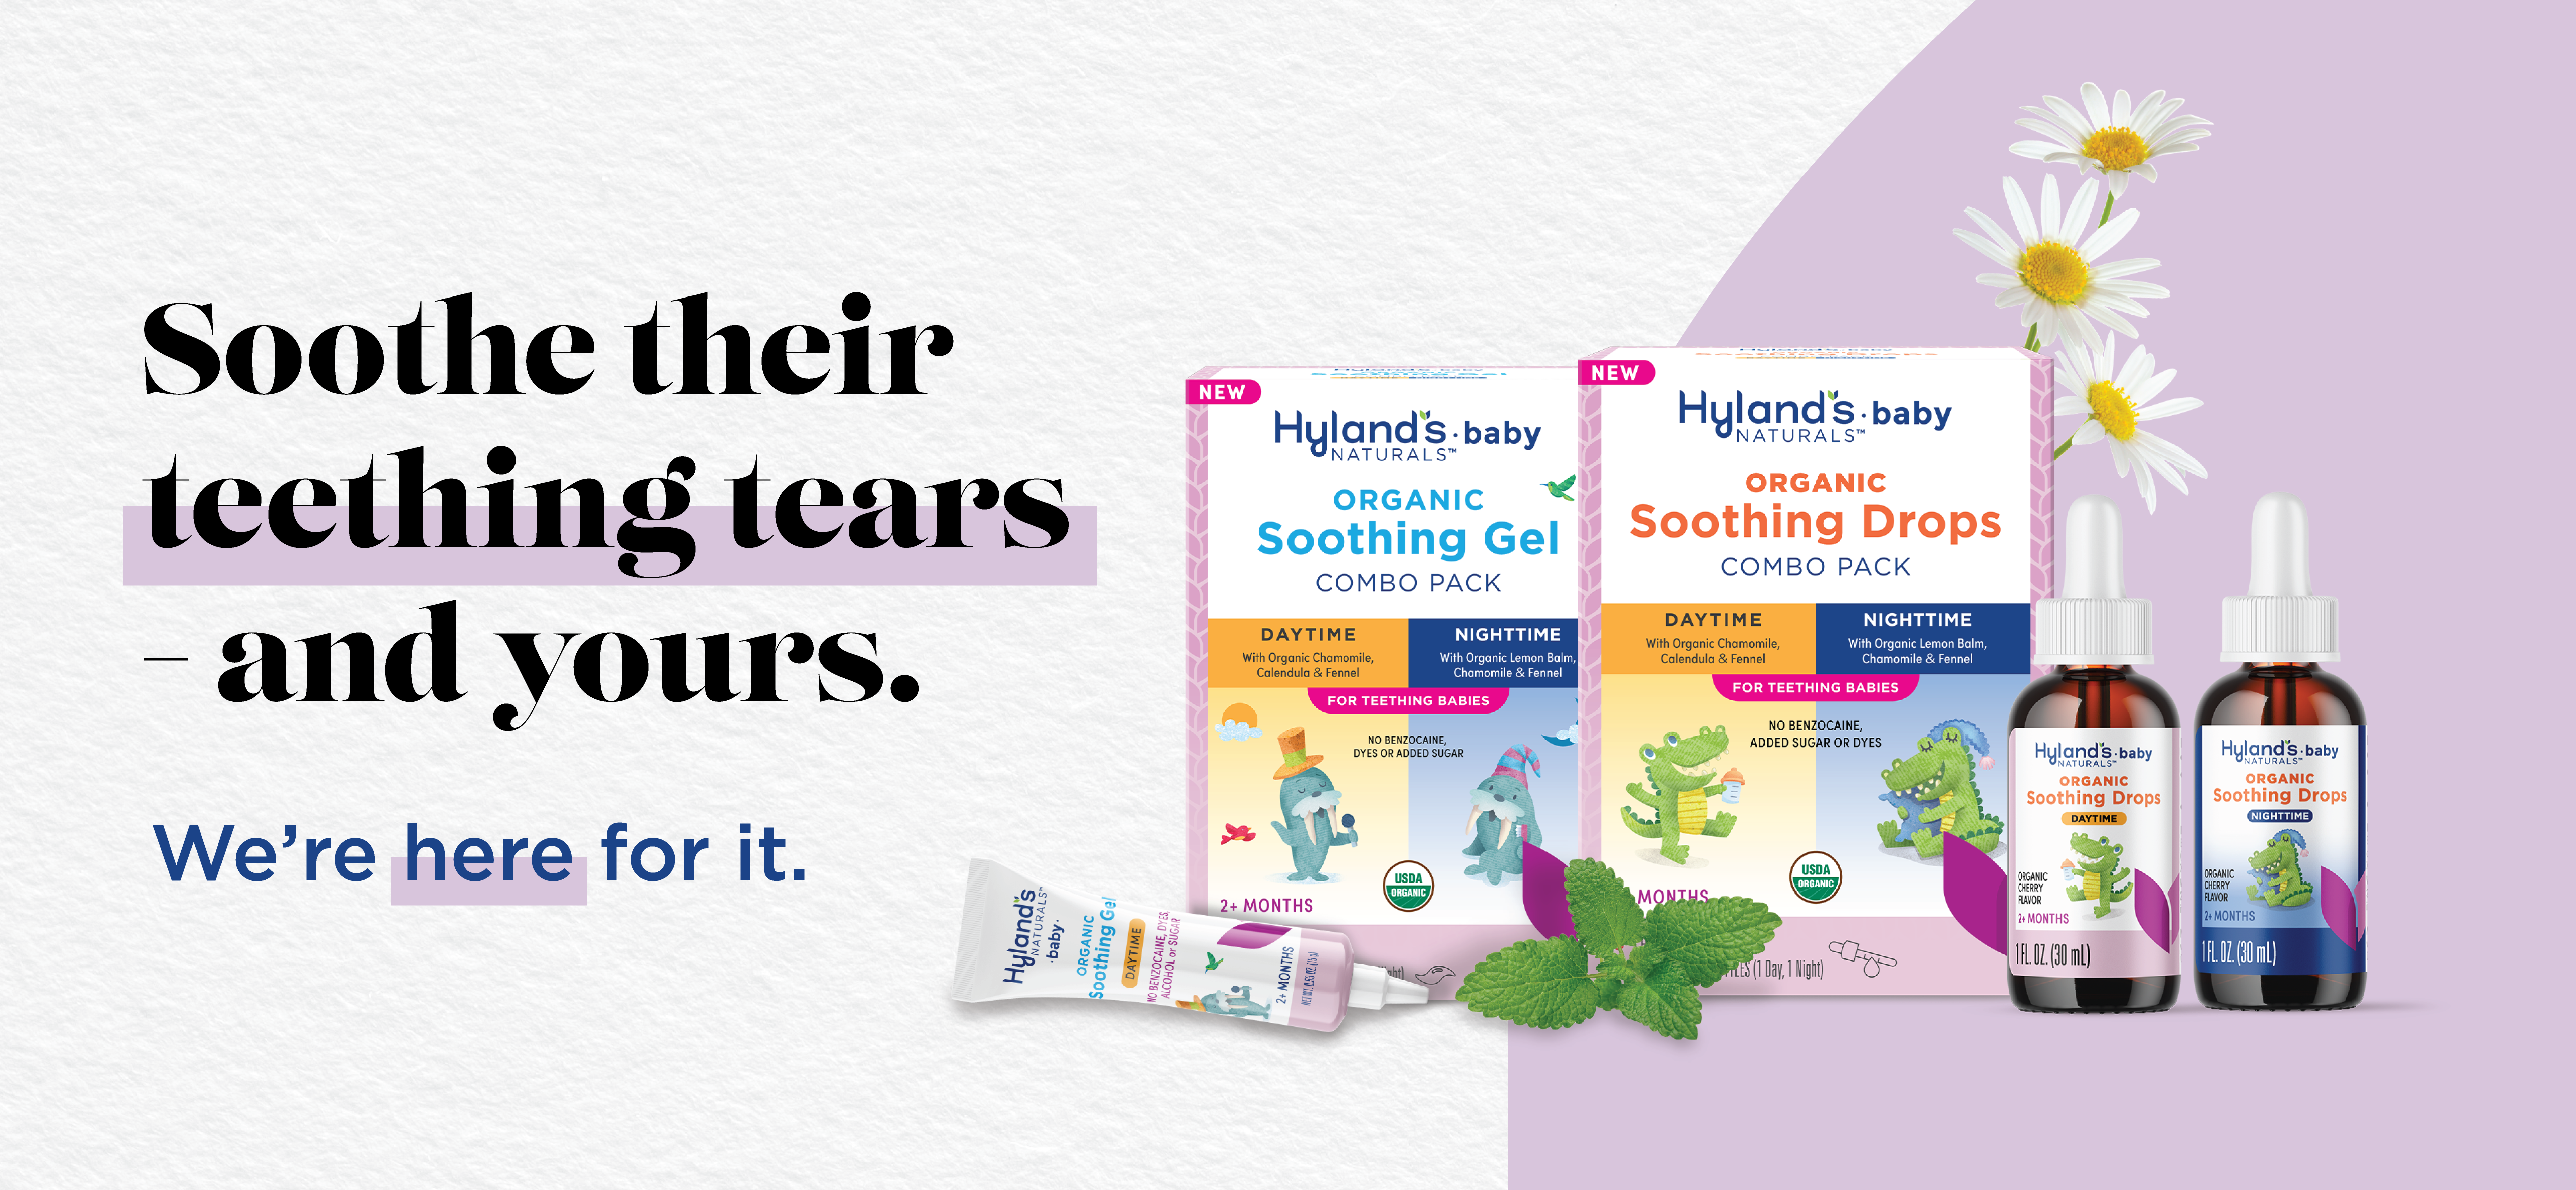 Soothe their teething tears - and yours. 